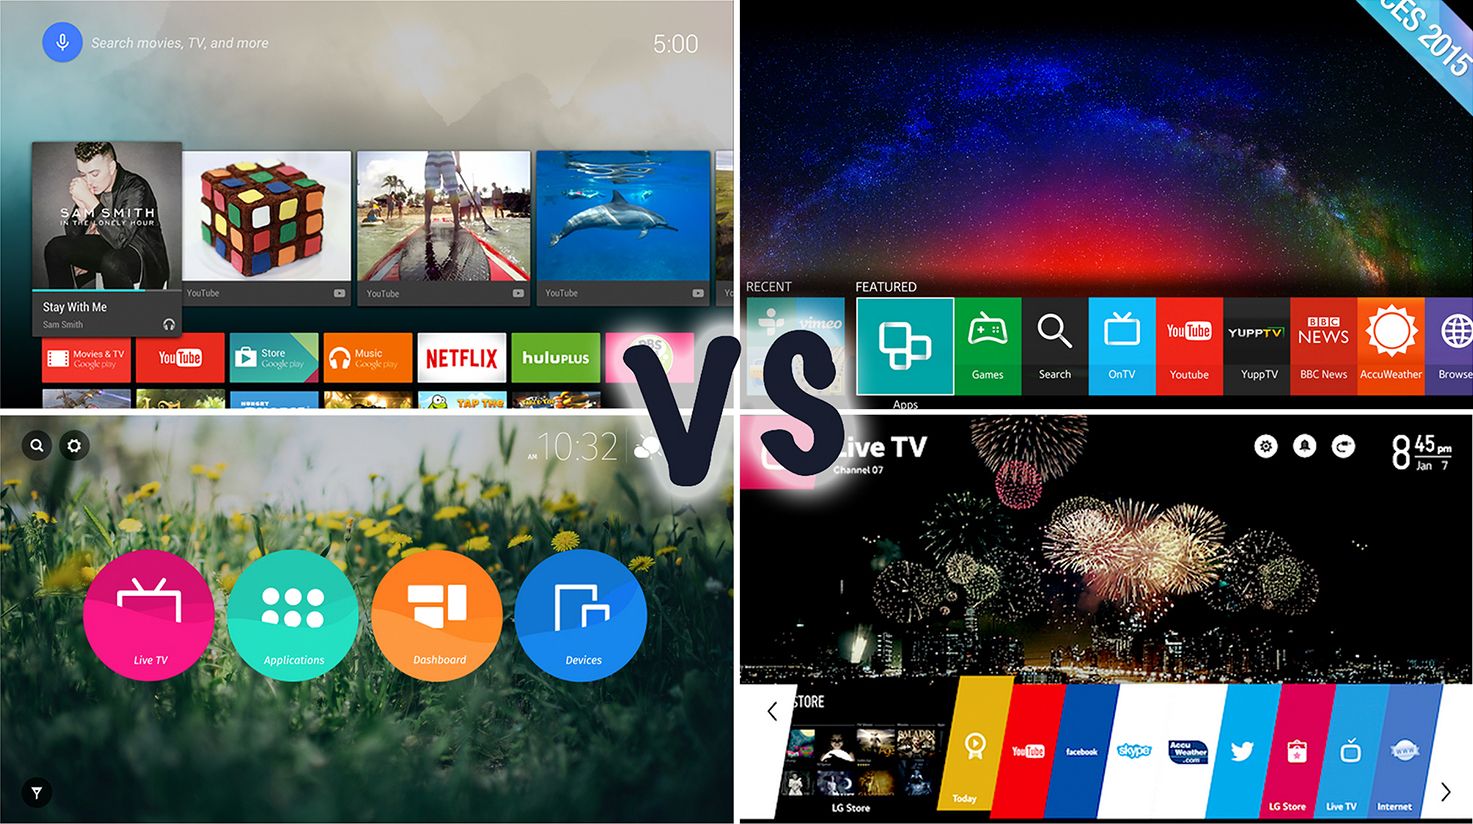 Android TV vs Samsung Tizen vs Firefox OS vs LG webOS What's the